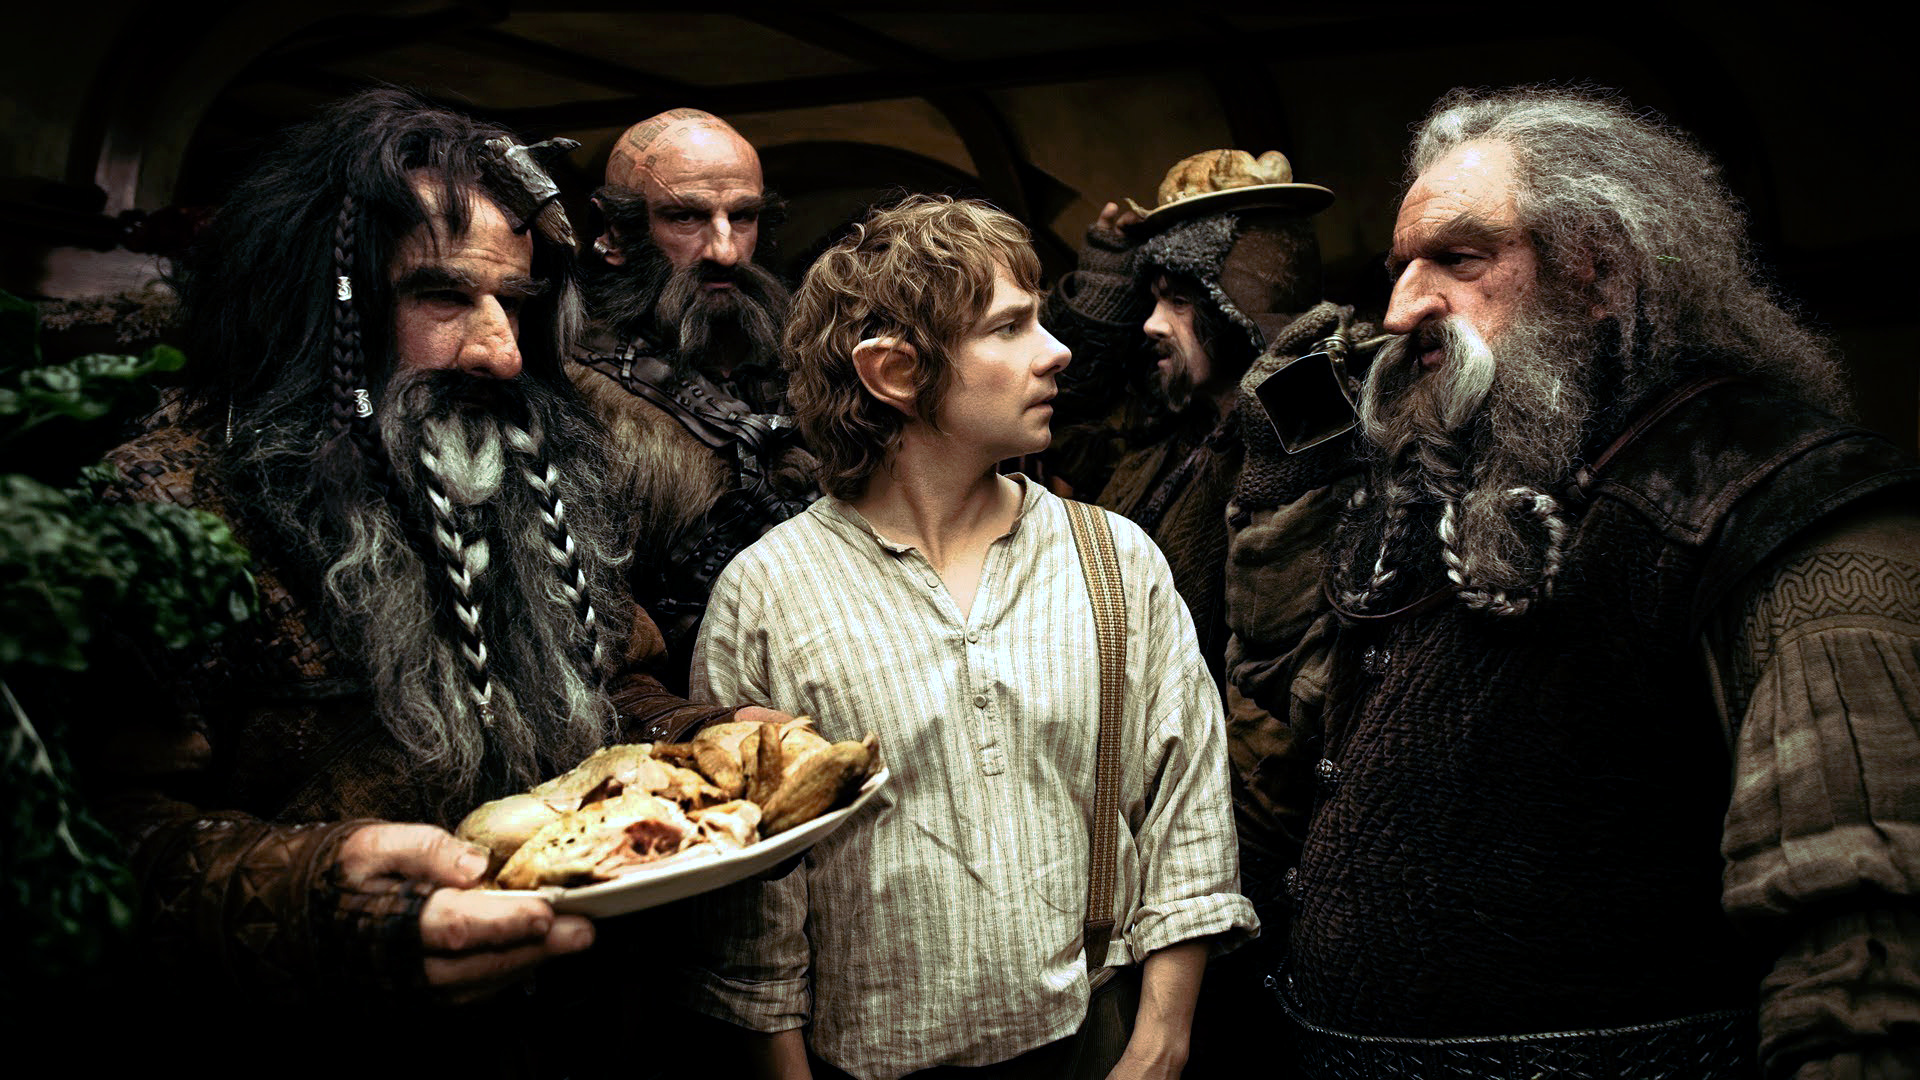 Dwarves (The Lord of the Rings): The Hobbit, Known as the Longbeards or Durin's Folk, Bilbo Baggins. 1920x1080 Full HD Wallpaper.